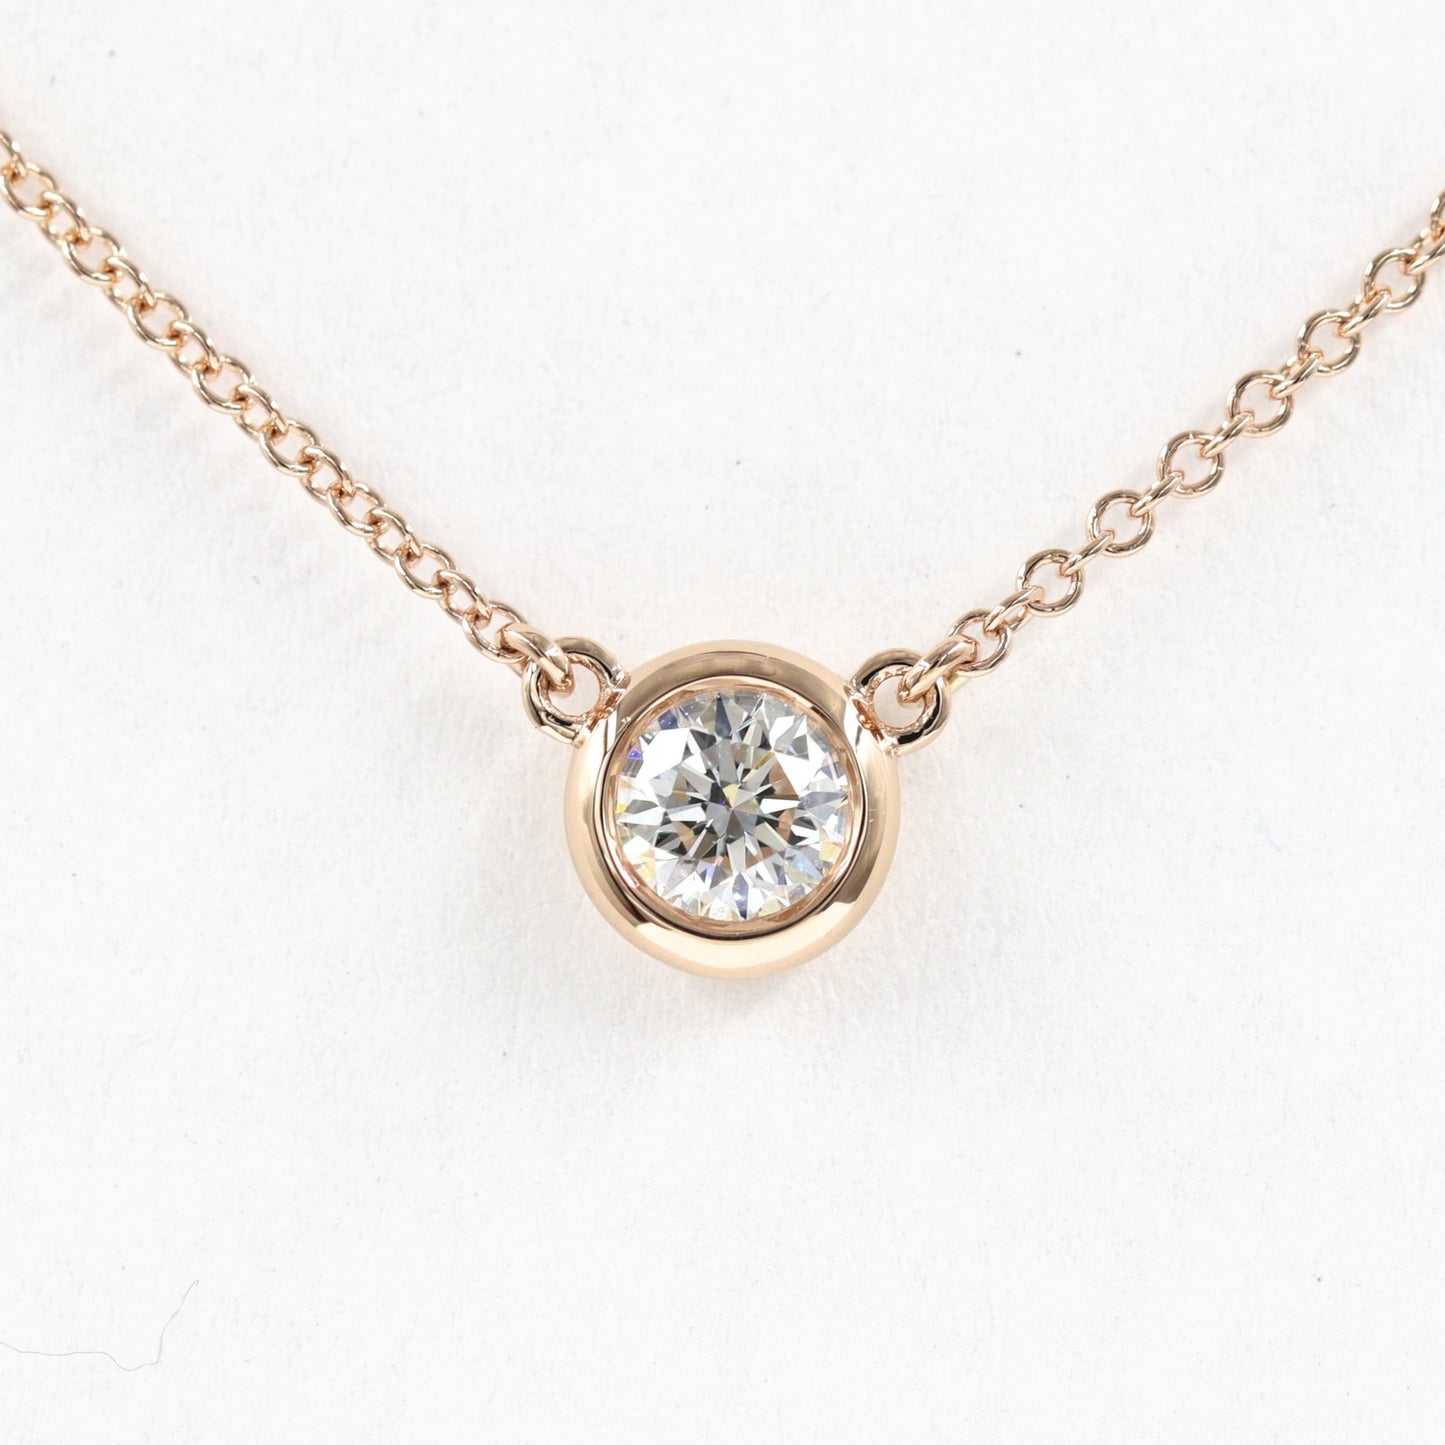 0.1~0.3ct Diamond Solitaire Necklace / Diamond Solitaire Necklace / Anniversary Necklace / Minimalist Necklace / Gift for her